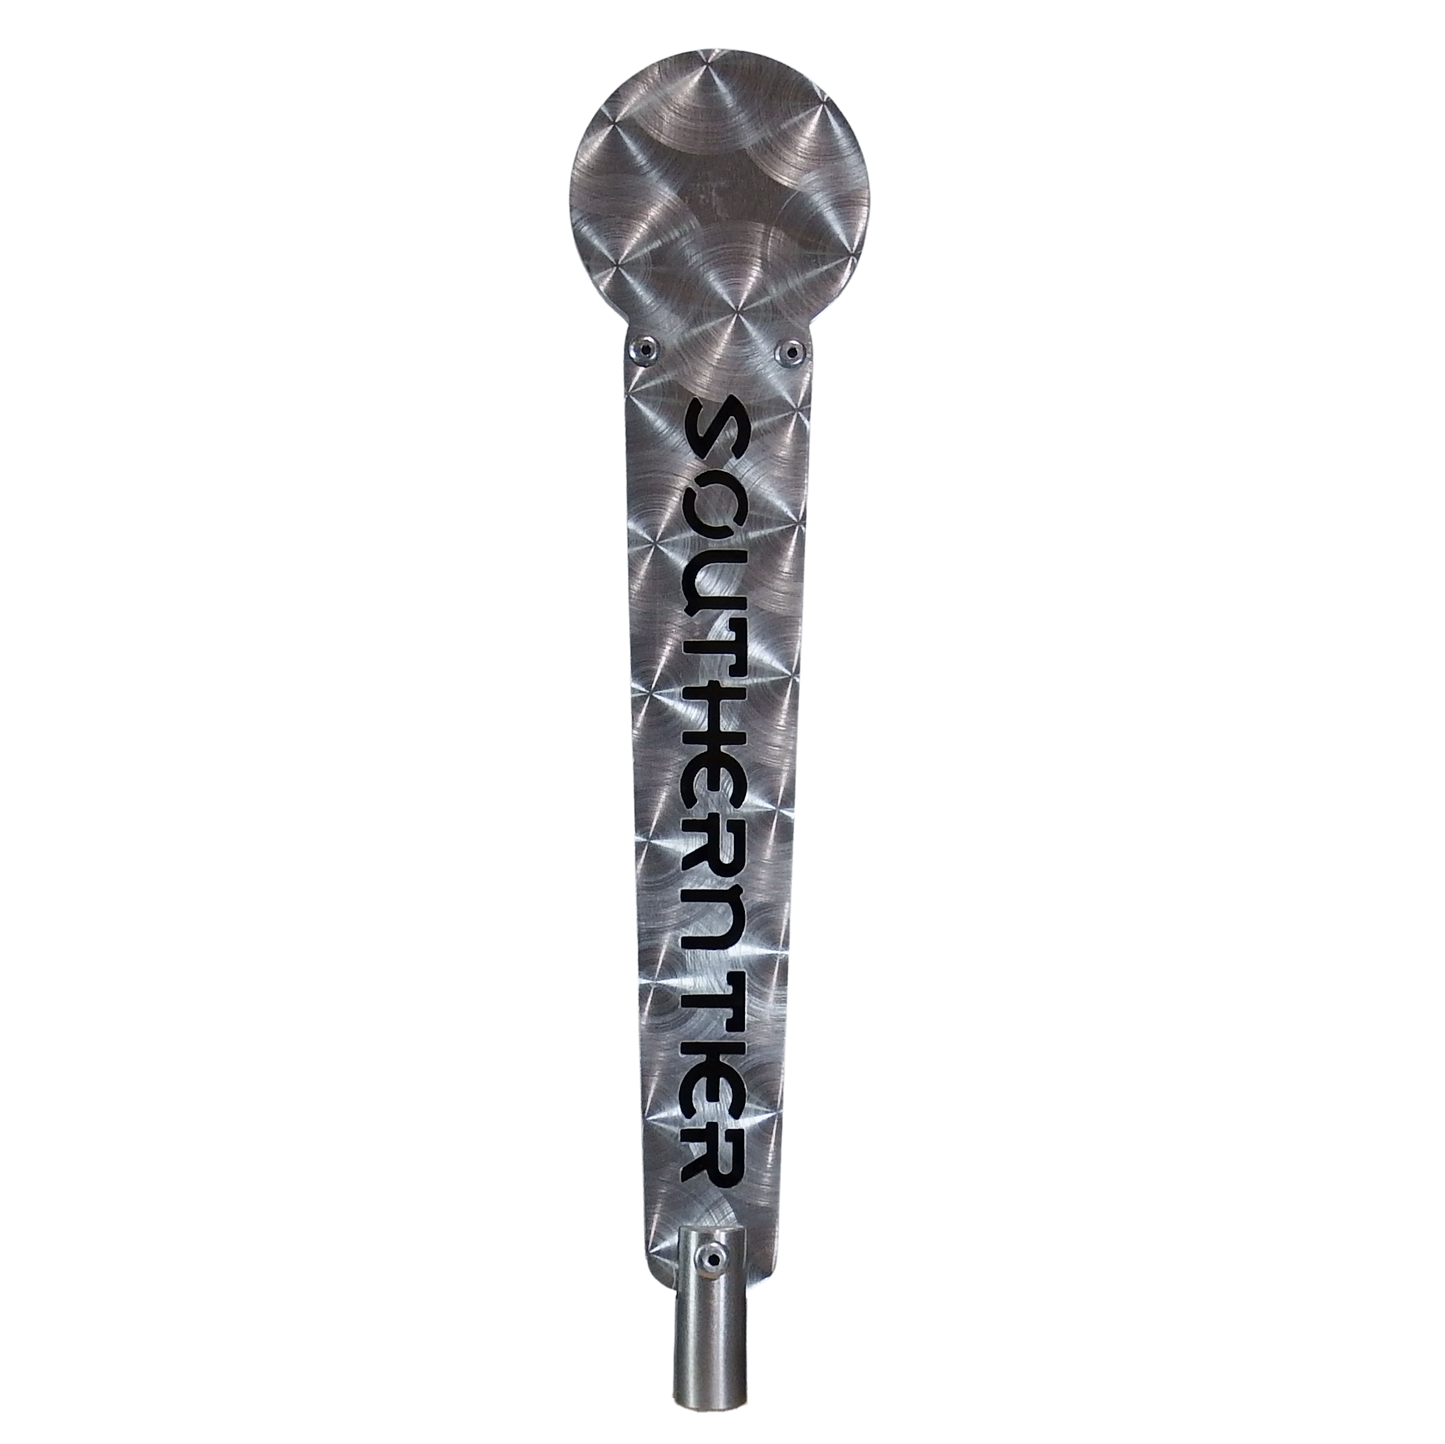 Southern Tier Brewing Company Beer Tap Handle / Shift Knob